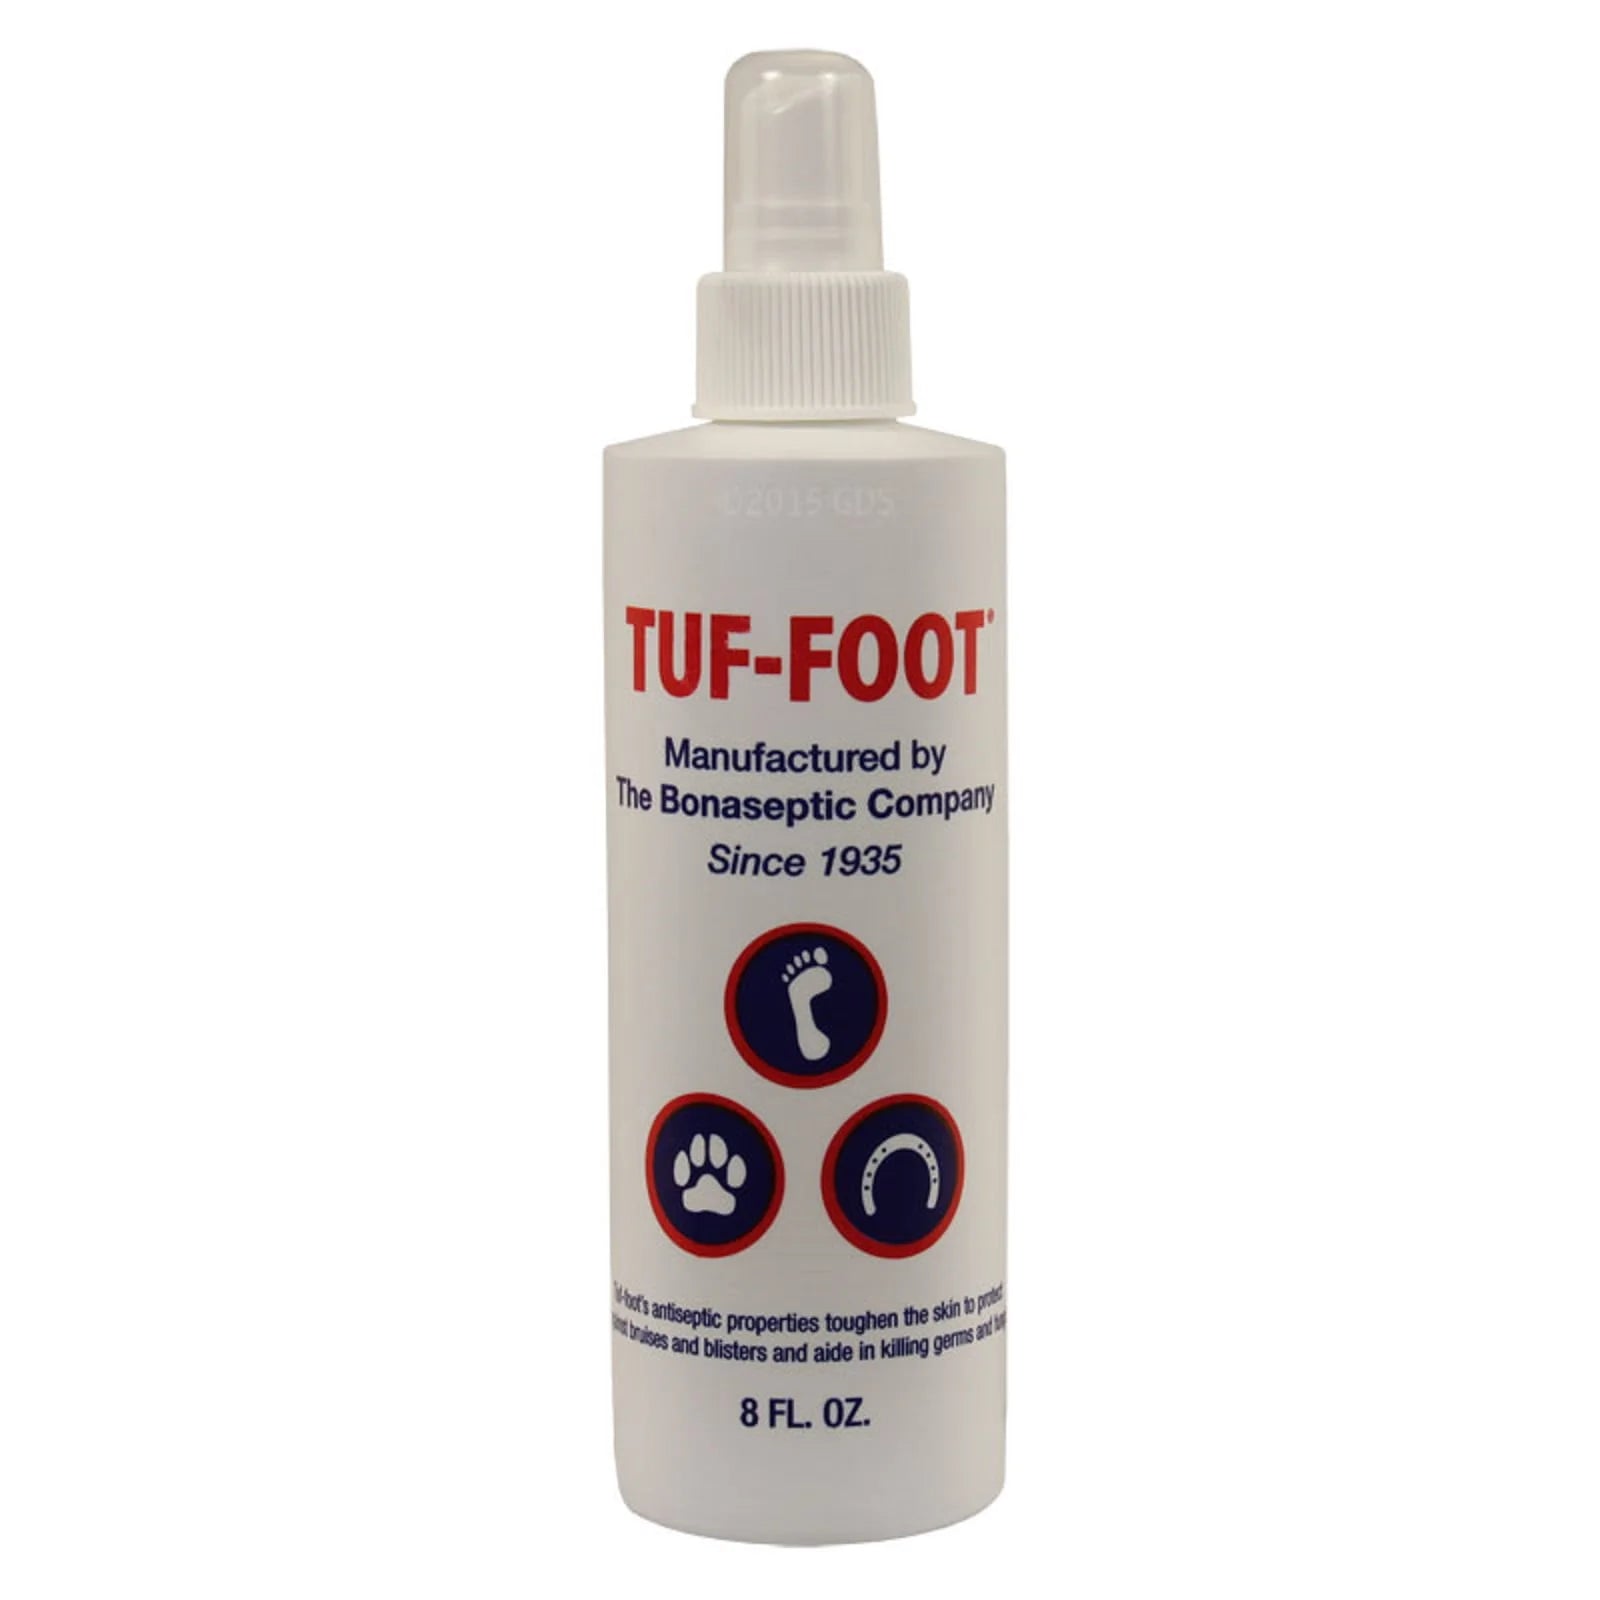 Tuf-Foot for Dogs